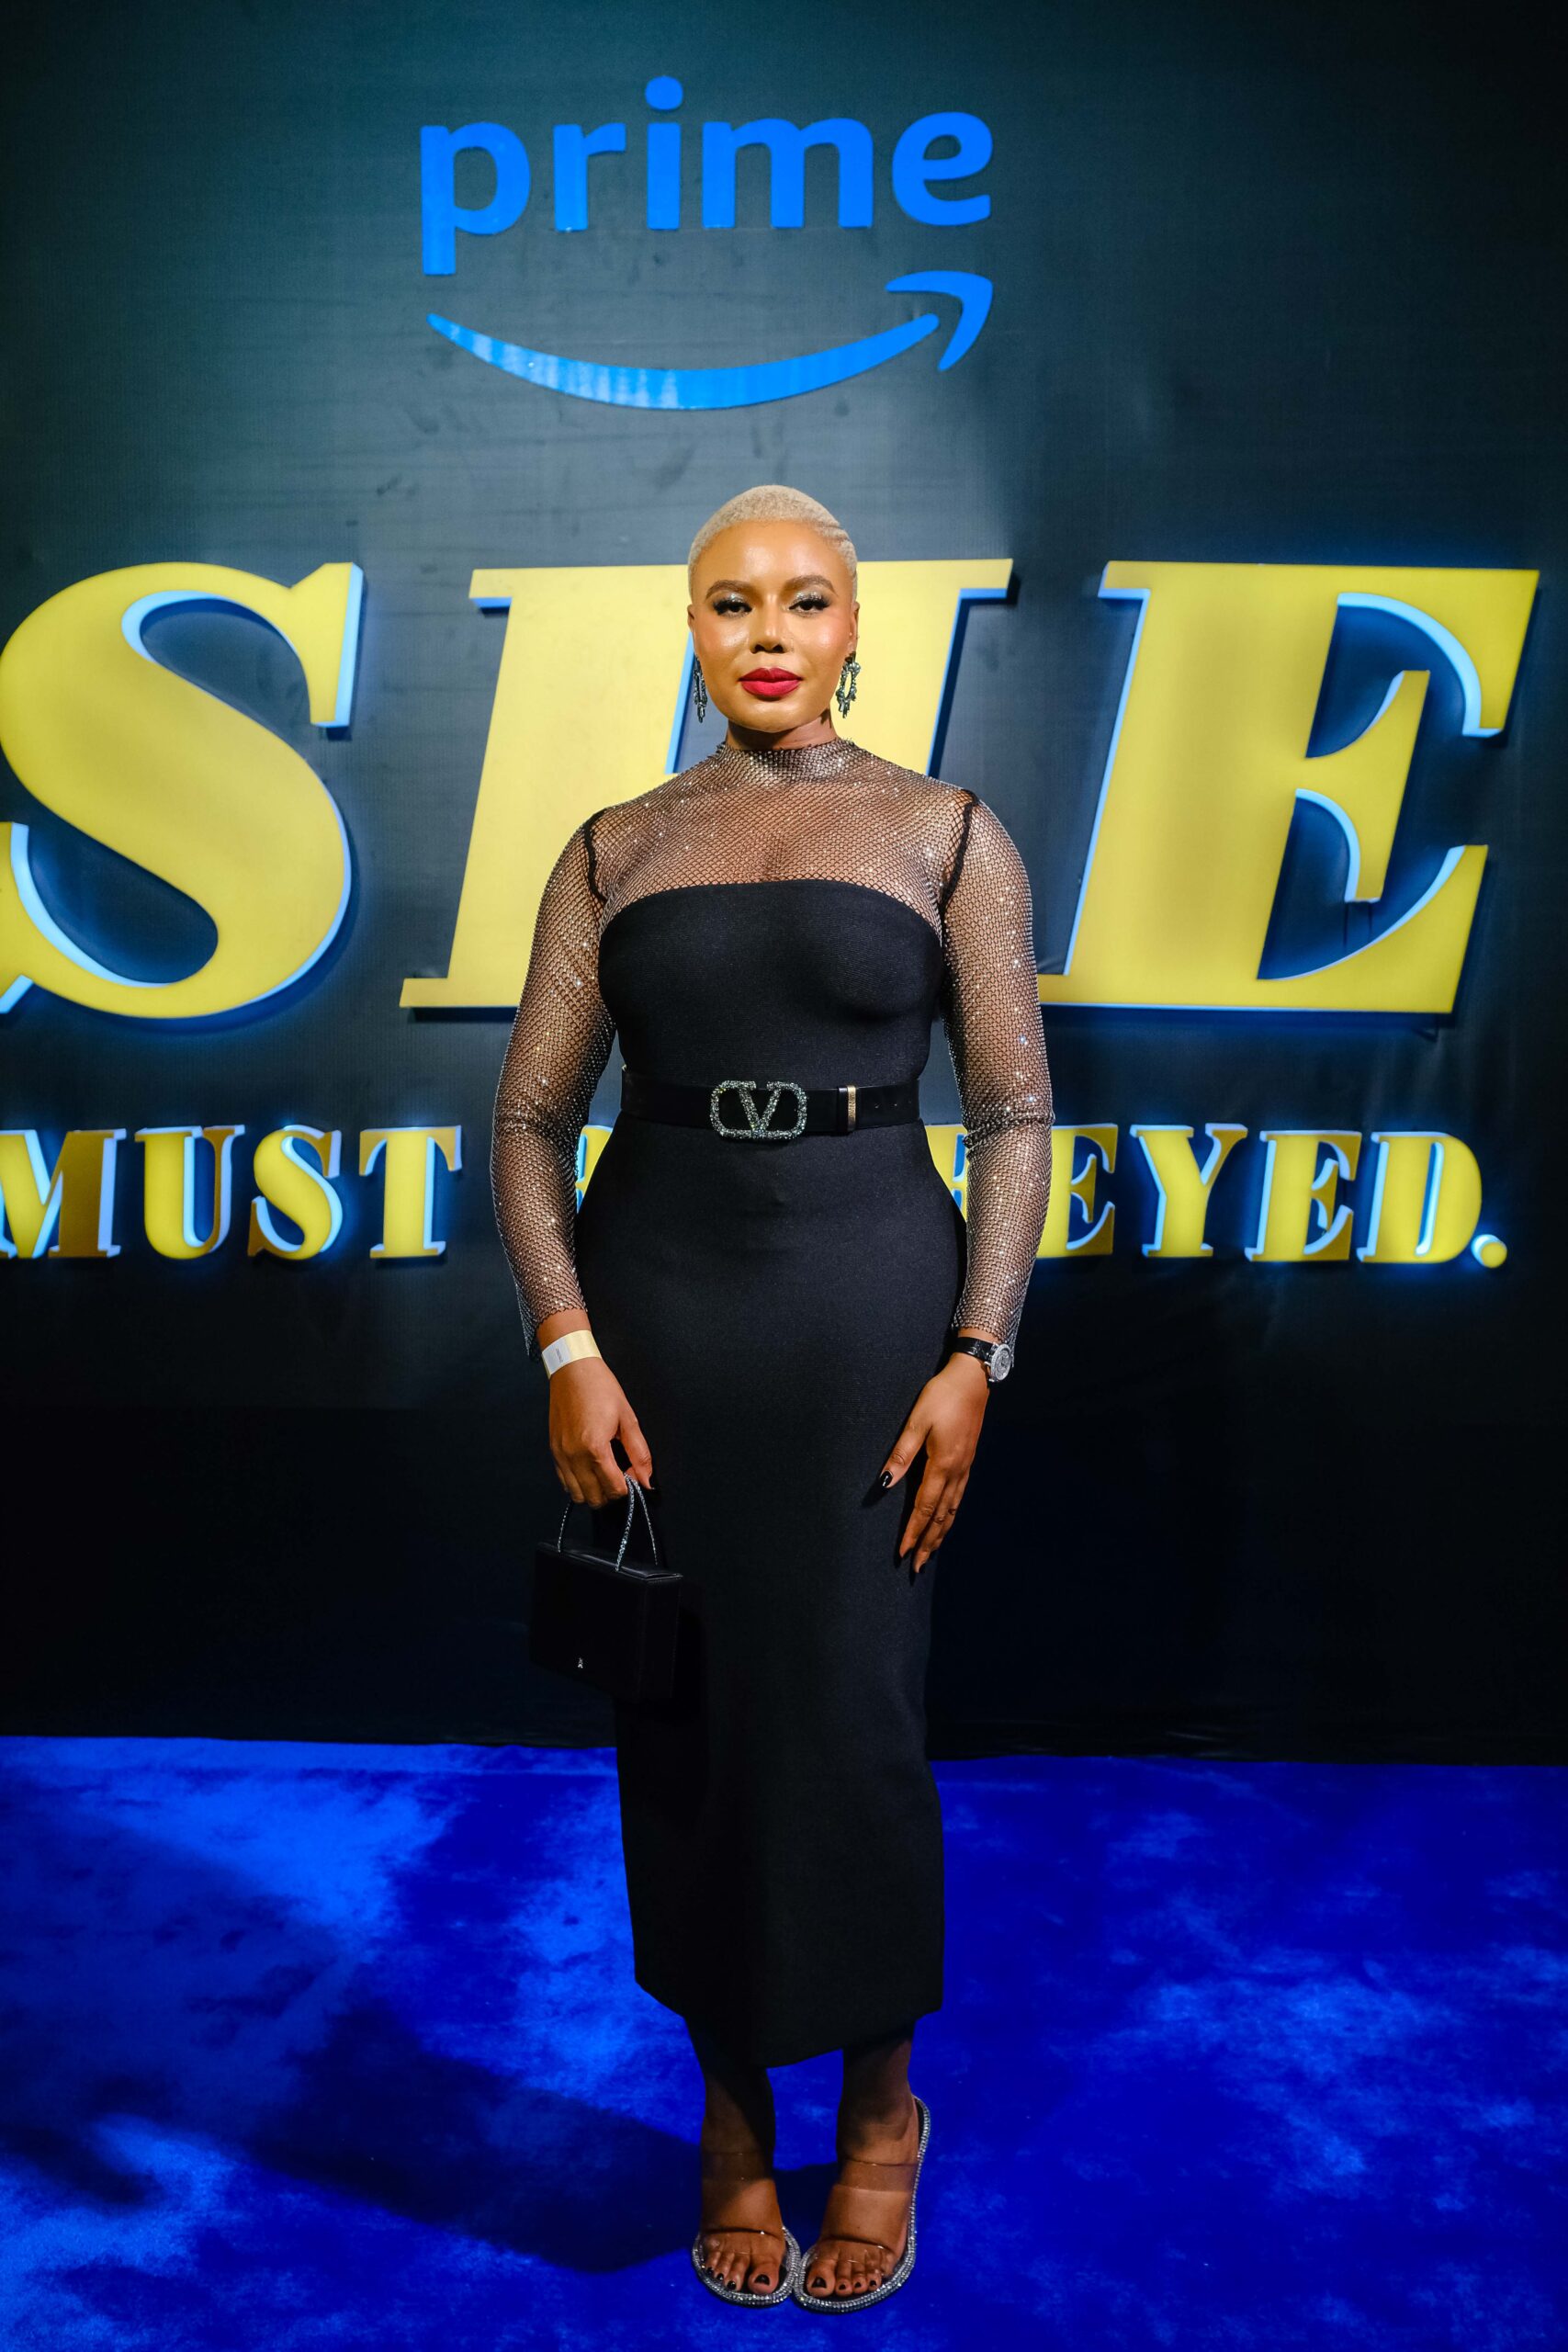 BIGV0172 scaled - Prime Video Launches “She Must Be Obeyed” Series, Its 3rd Nigerian Original Title With Grandeur and Style!